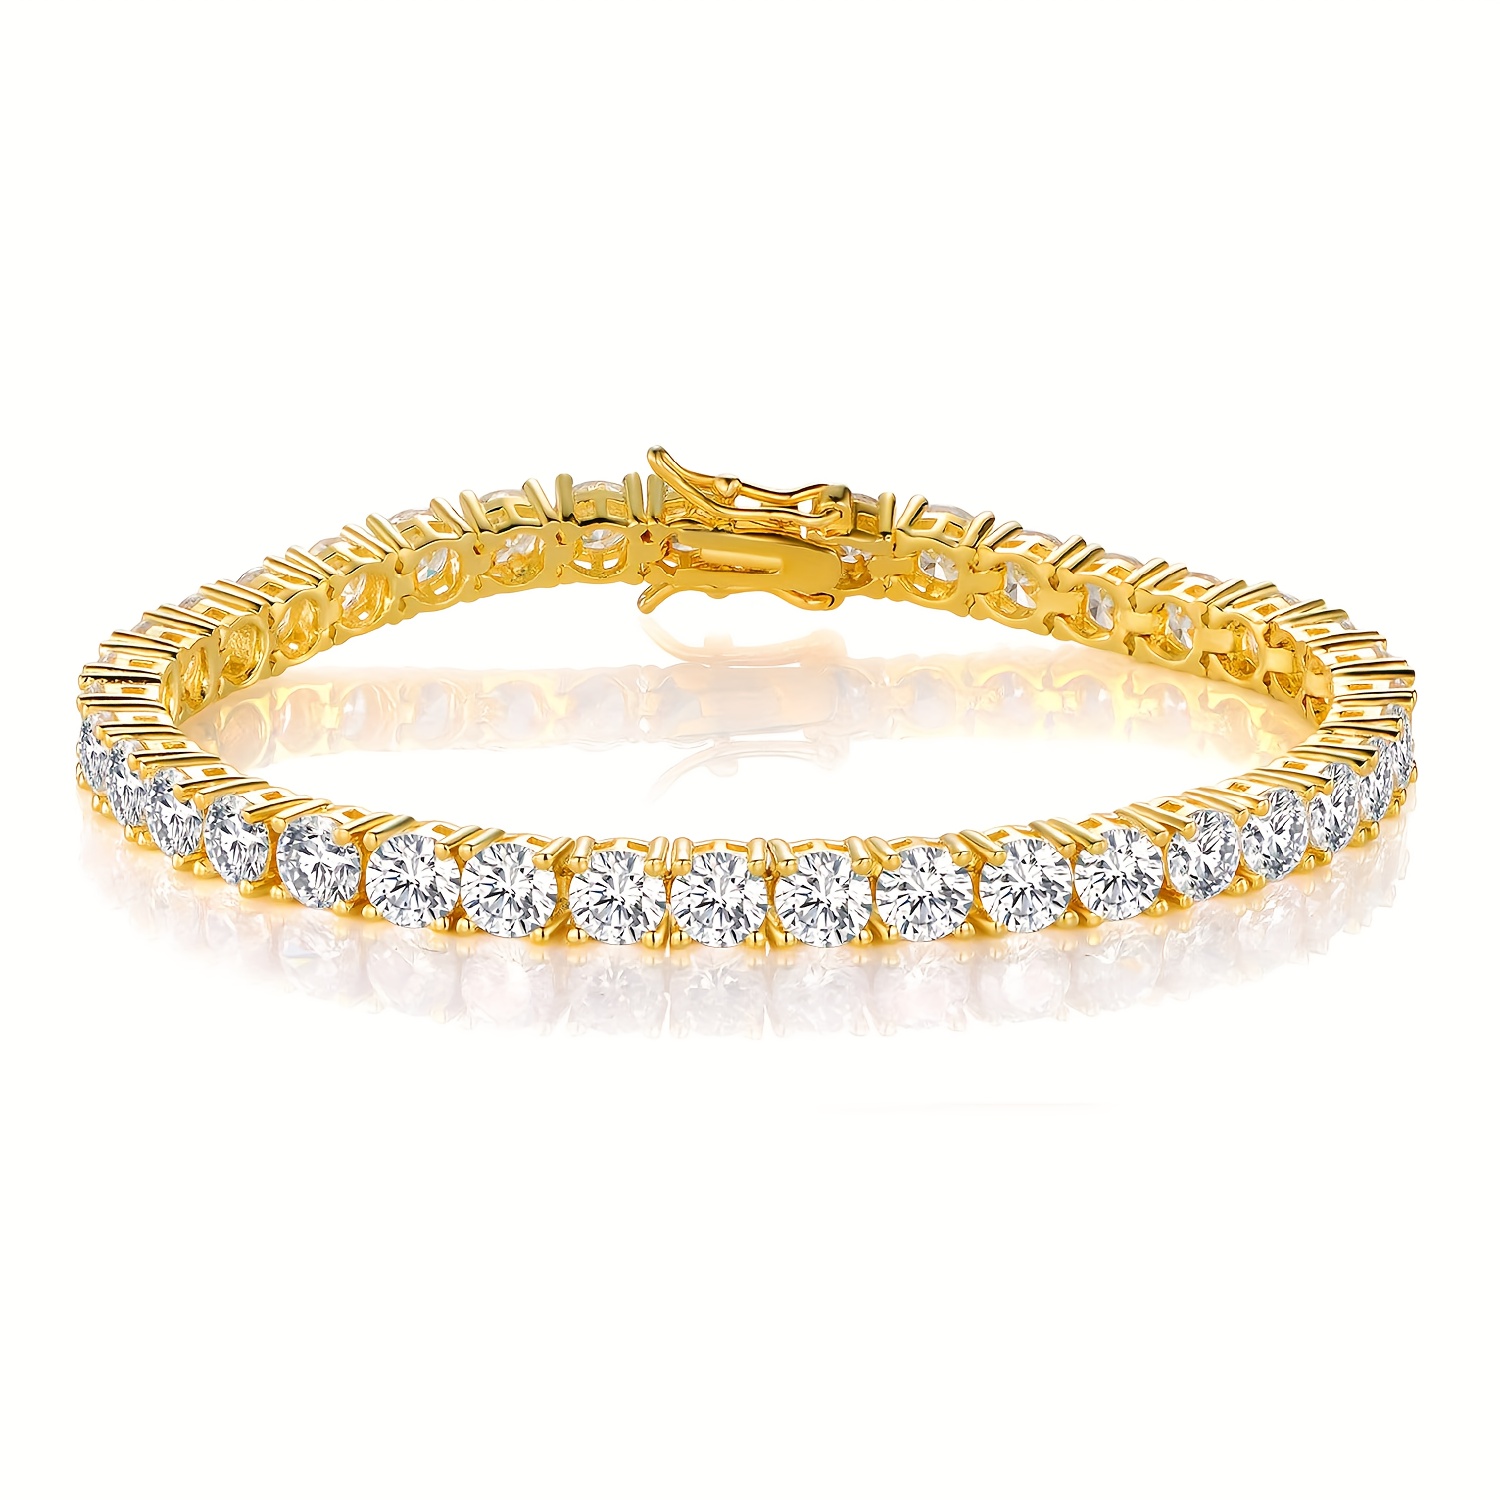 

18k Gold Plated 4.0 Round Cubic Zirconia Classic Tennis Bracelet 6-9 Inches